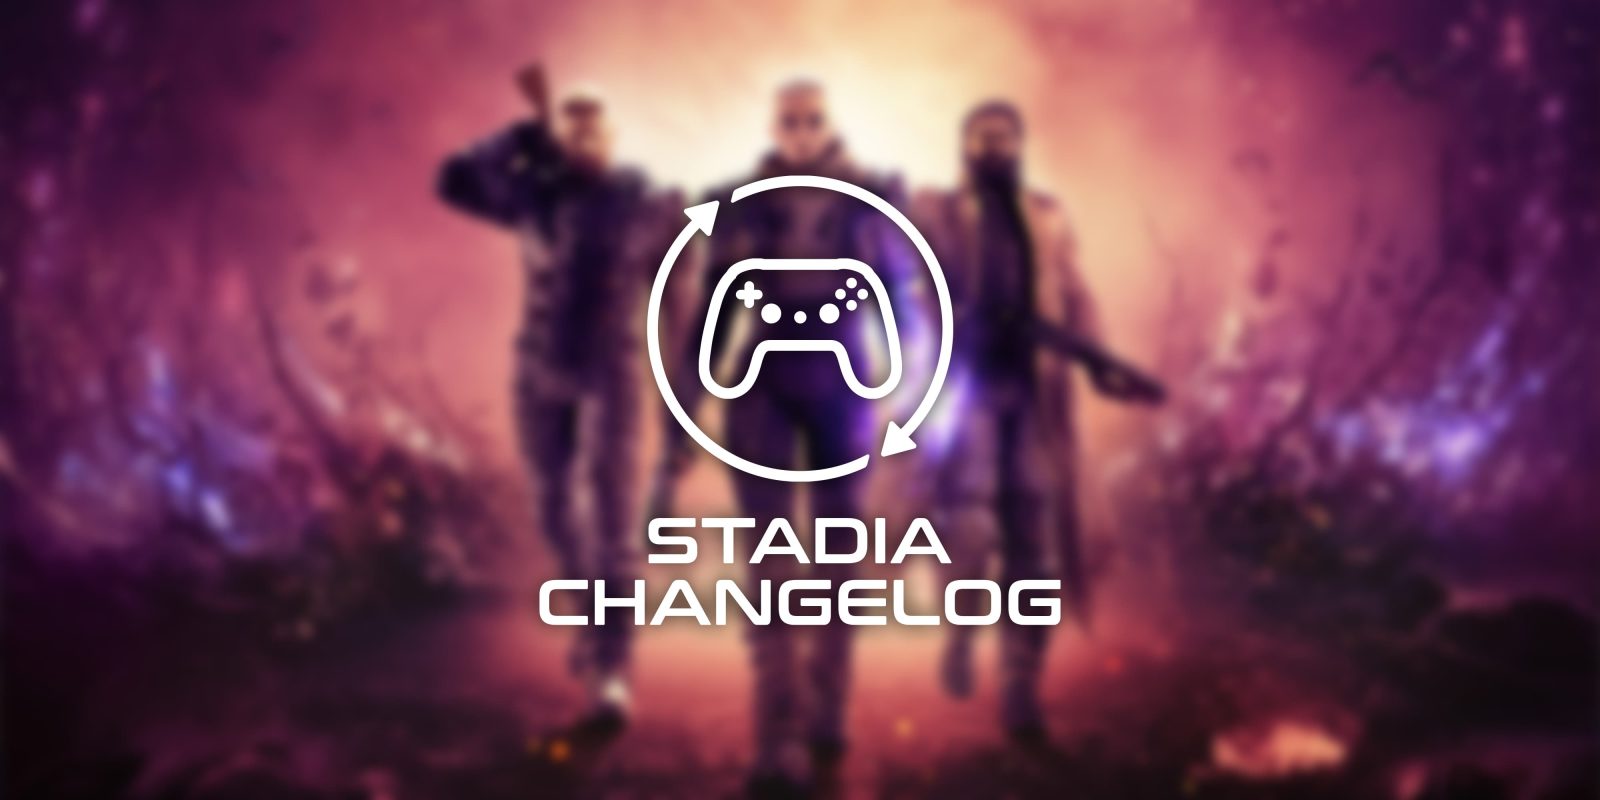 stadia changelog outriders game delay